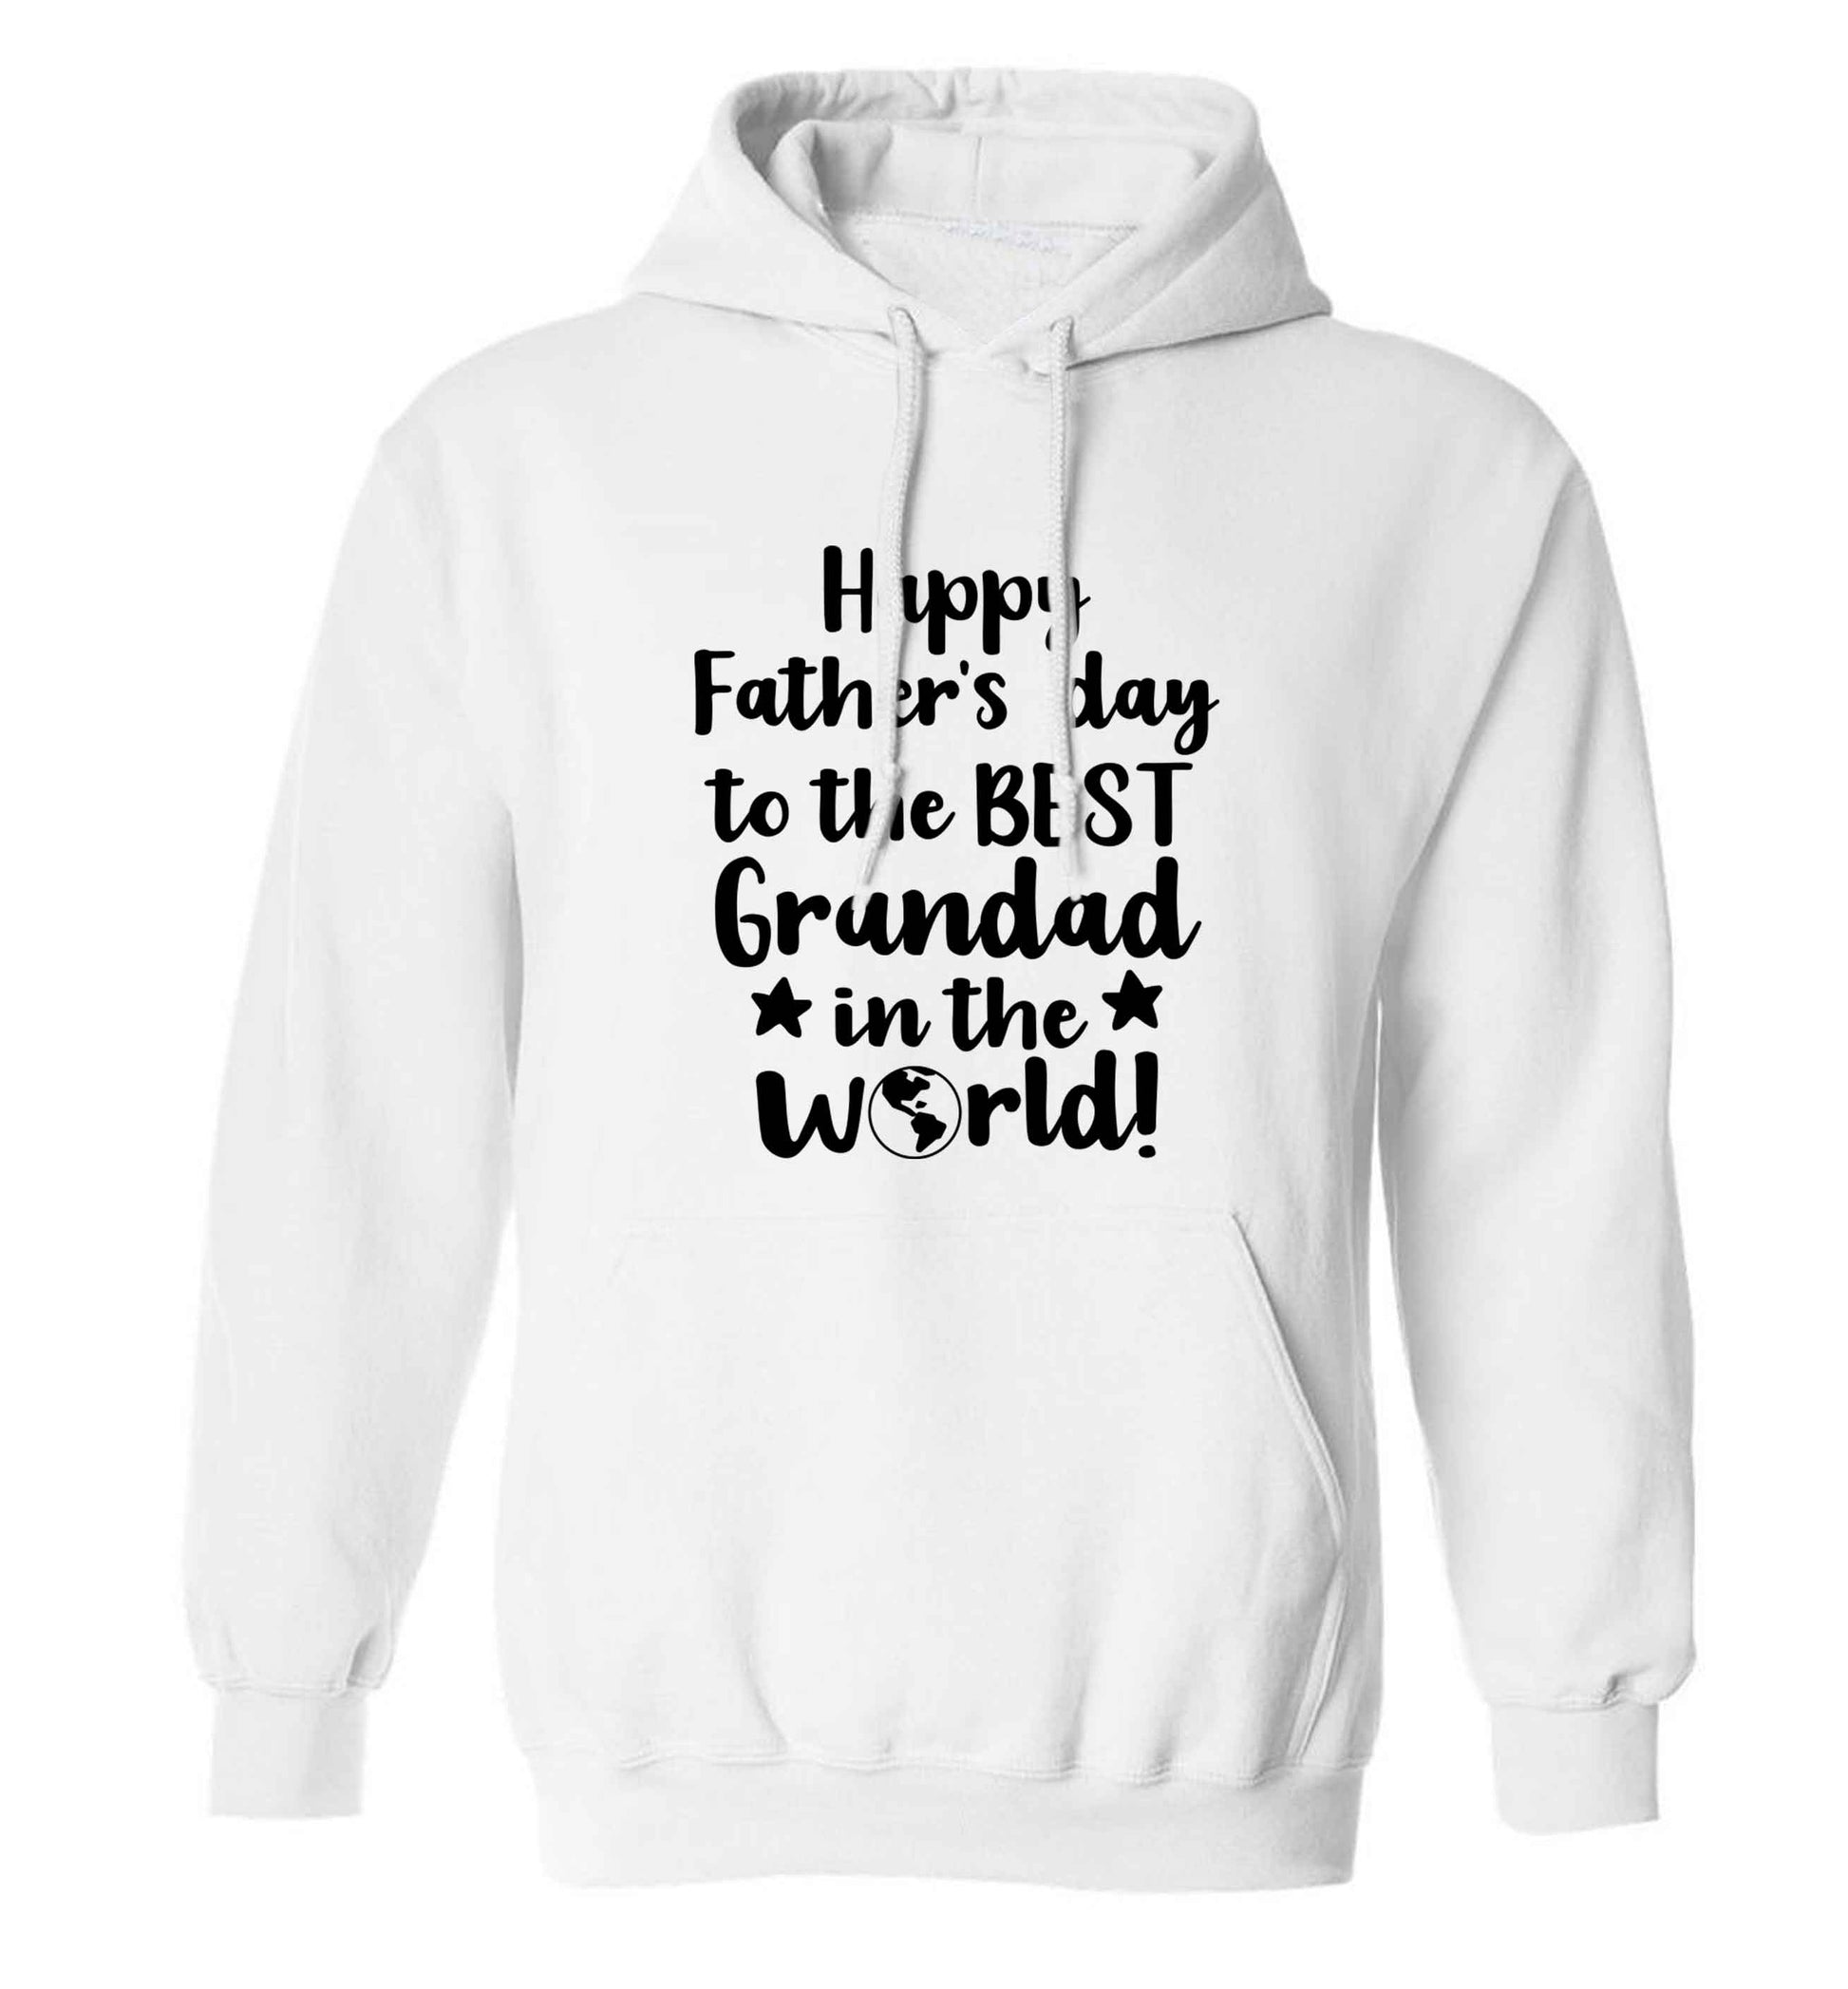 Happy Father's day to the best grandad in the world adults unisex white hoodie 2XL